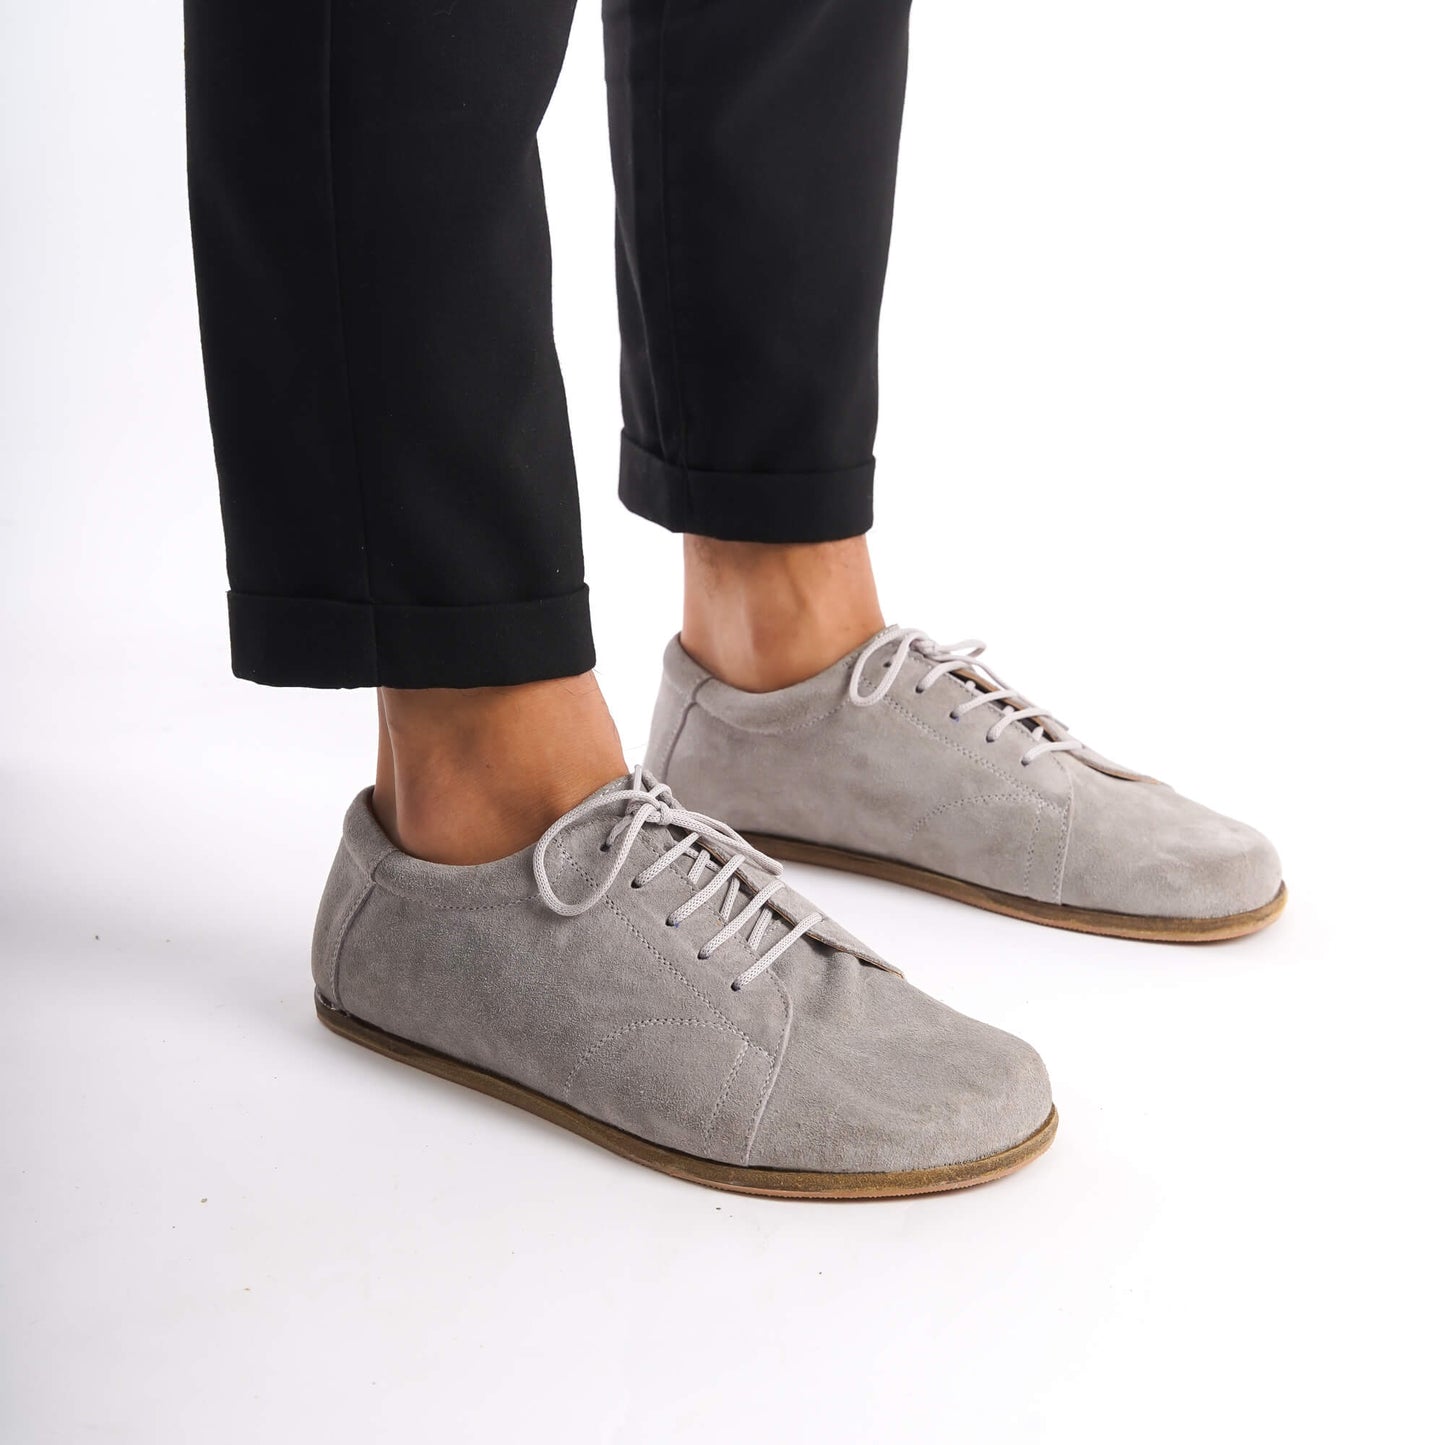 Stylish gray suede Lydia barefoot sneakers for men, perfect for natural and comfortable wear.